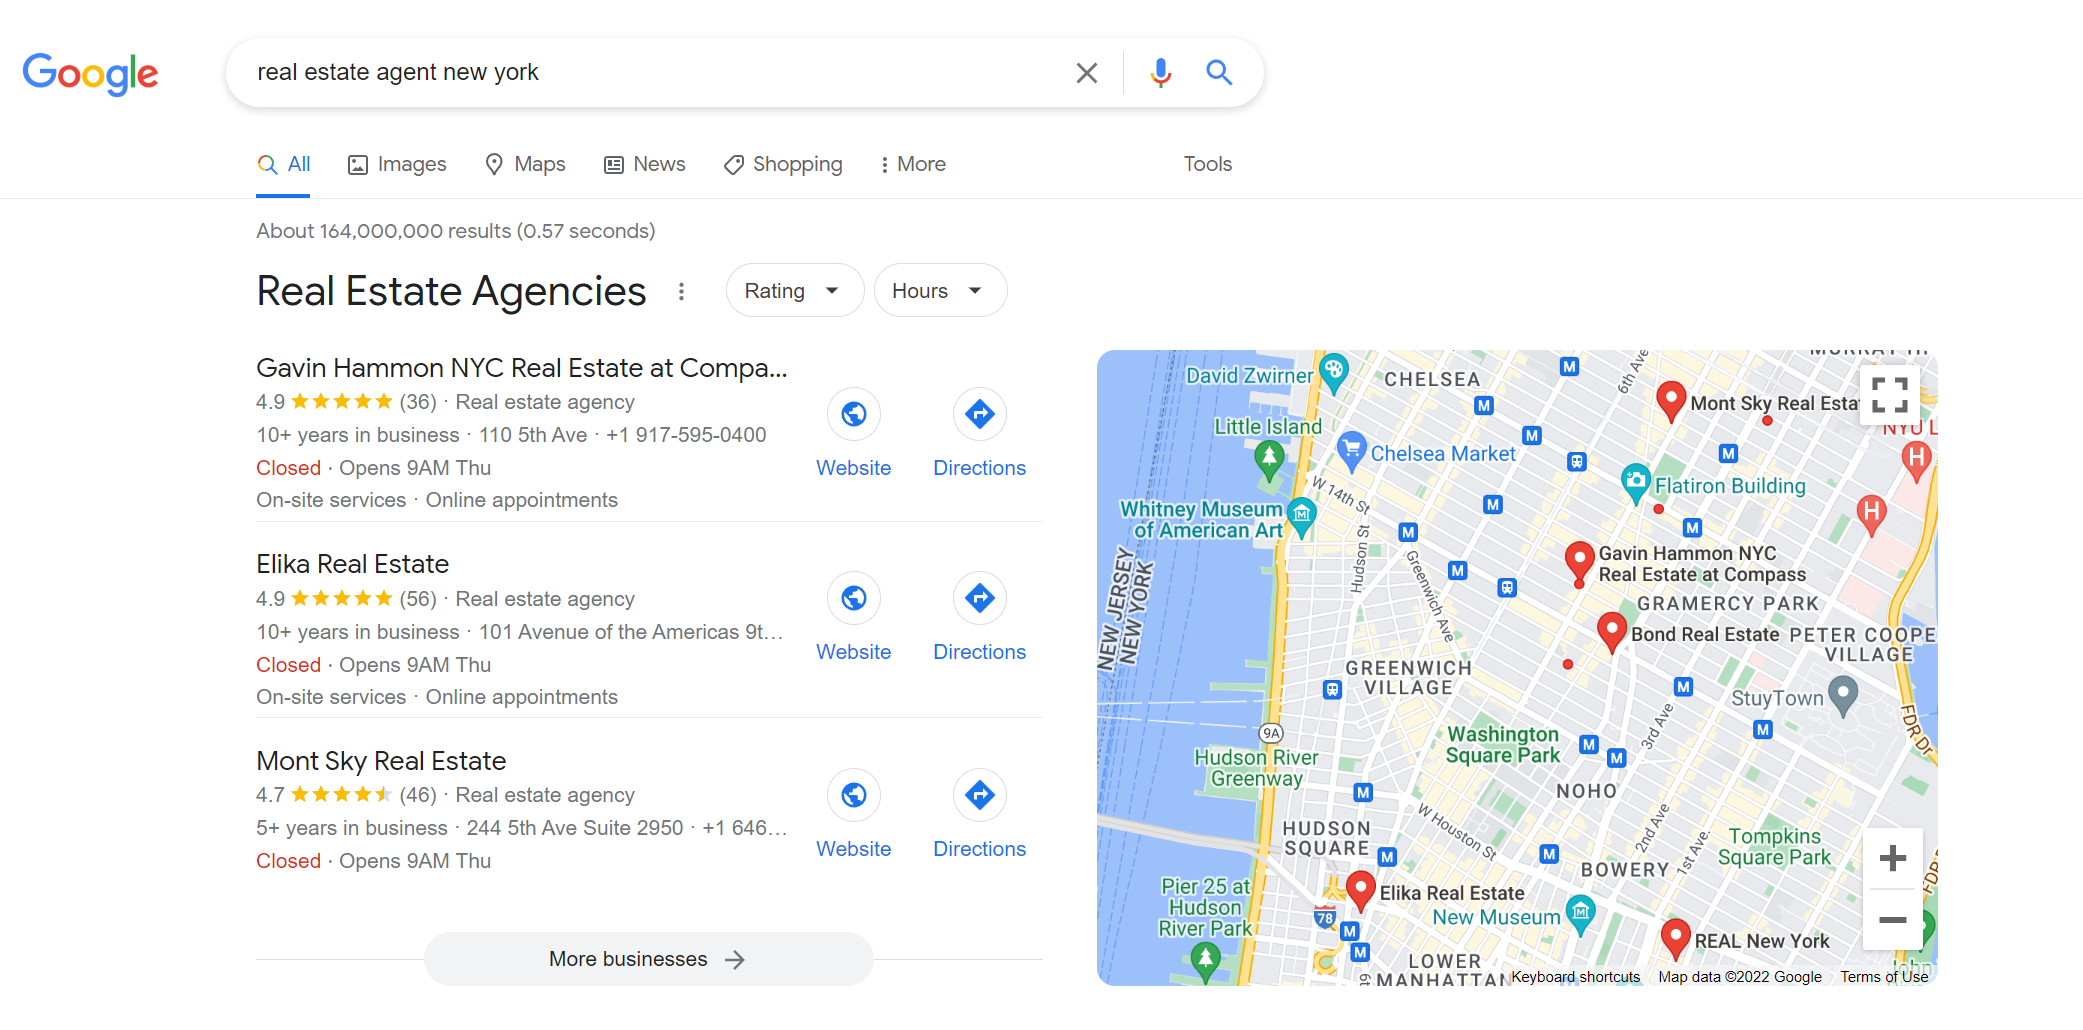 Results for real estate agent New York, showing Google Maps reviews